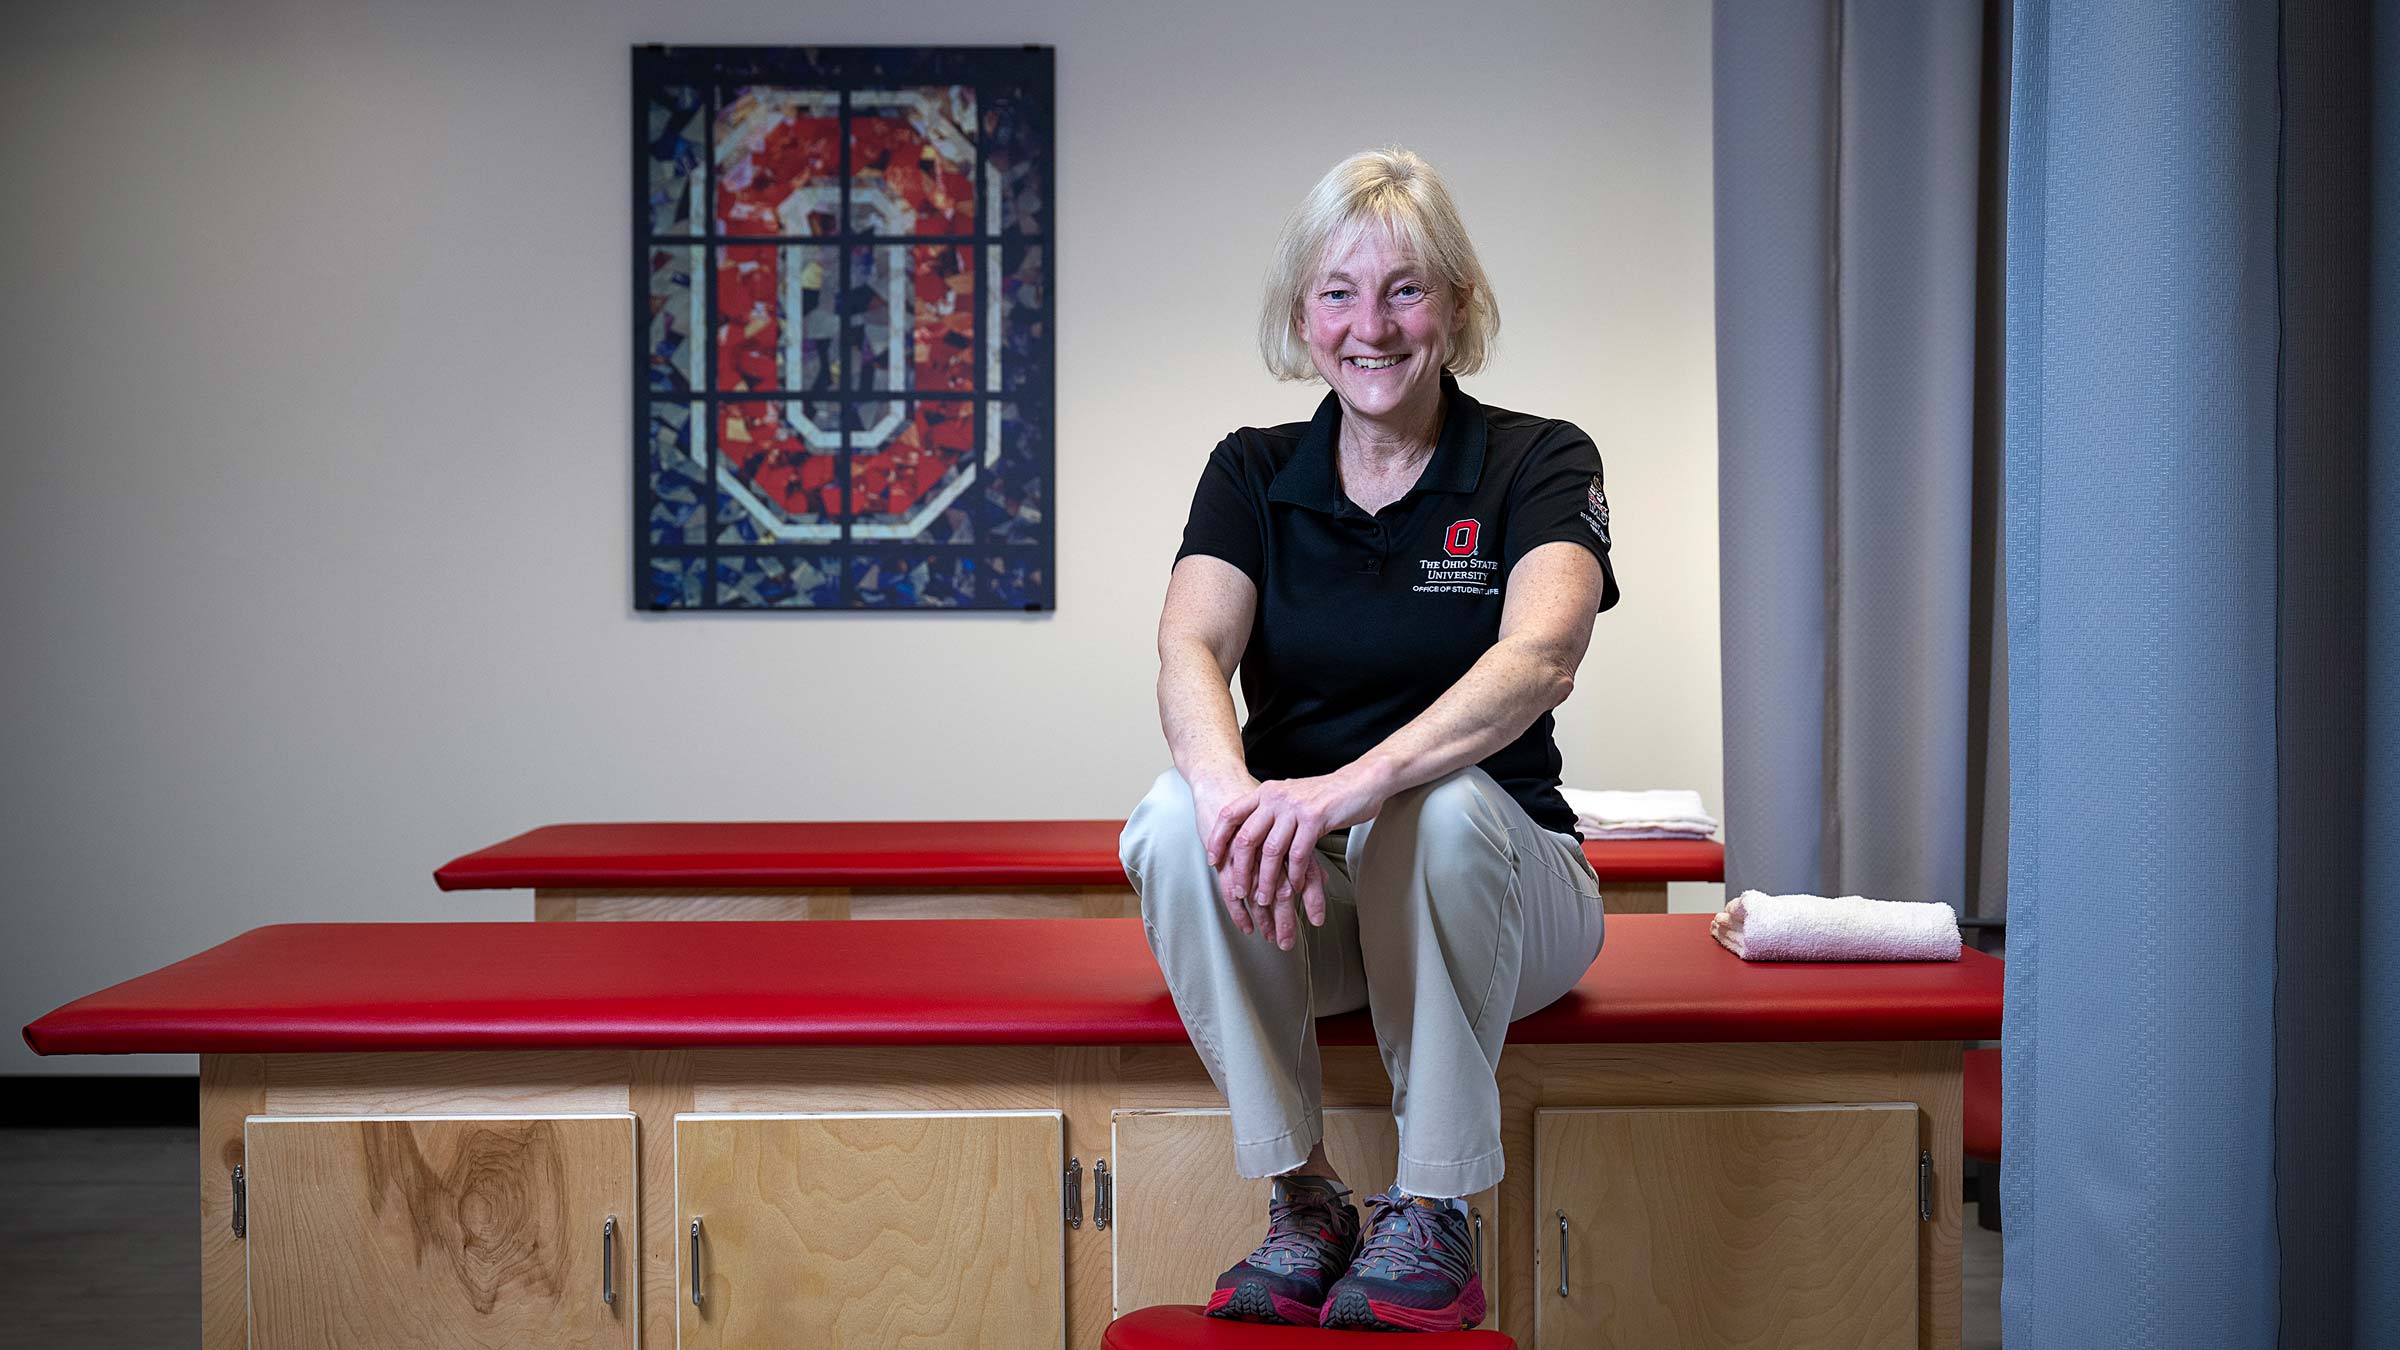 Pamela Bork, physical therapist for The Ohio State University’s Student Health Services, was a patient of Dr. Laxmi Meha's